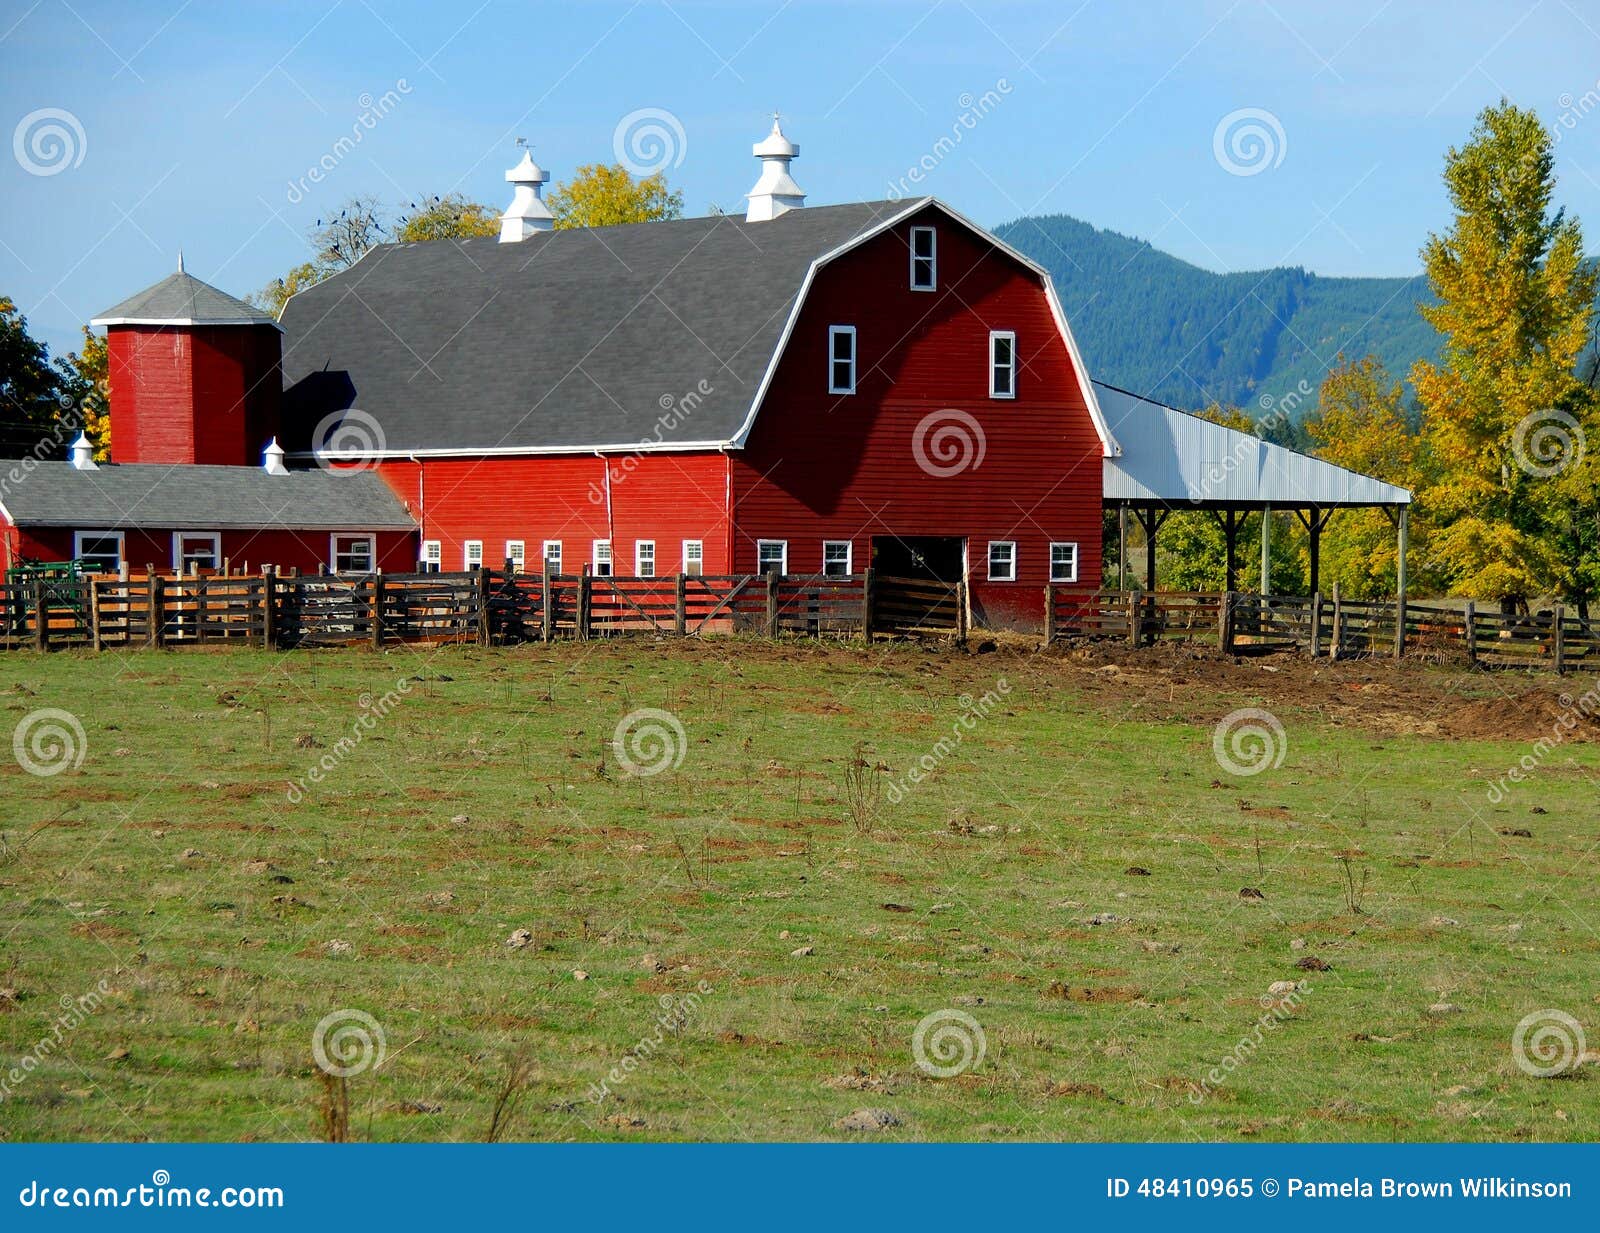 the quintessential red barn